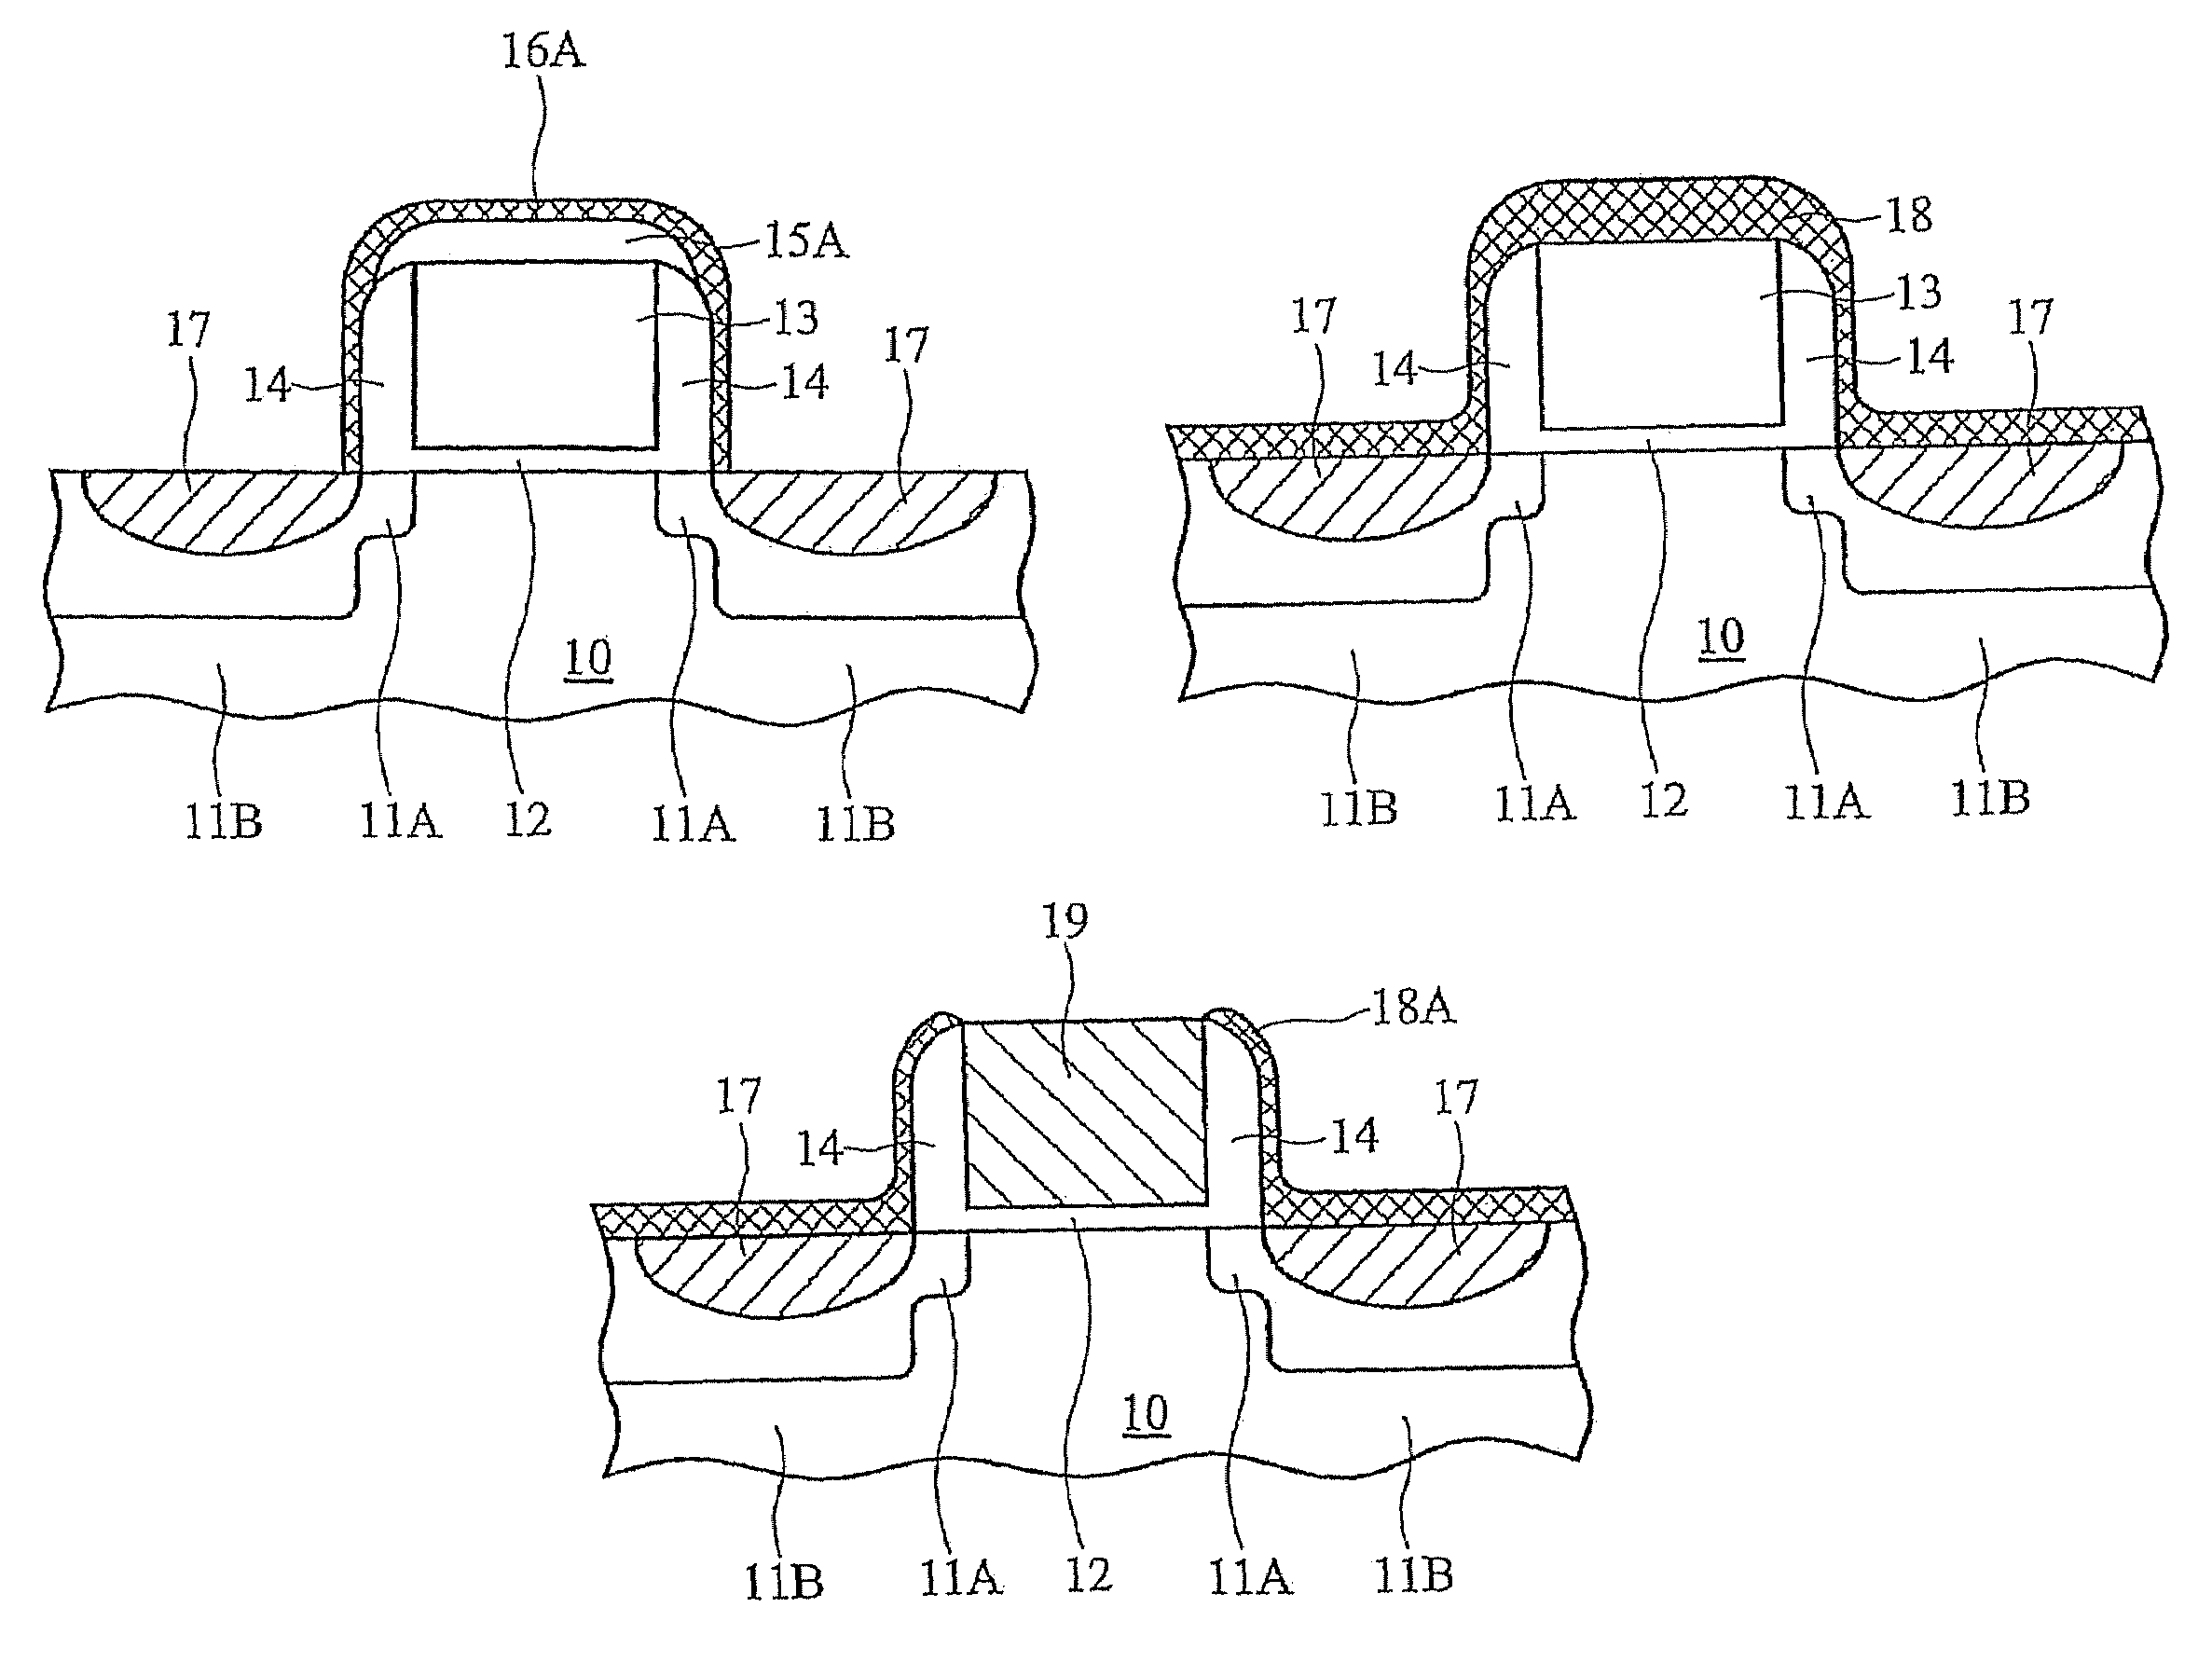 Semiconductor structure including silicide regions and method of making same